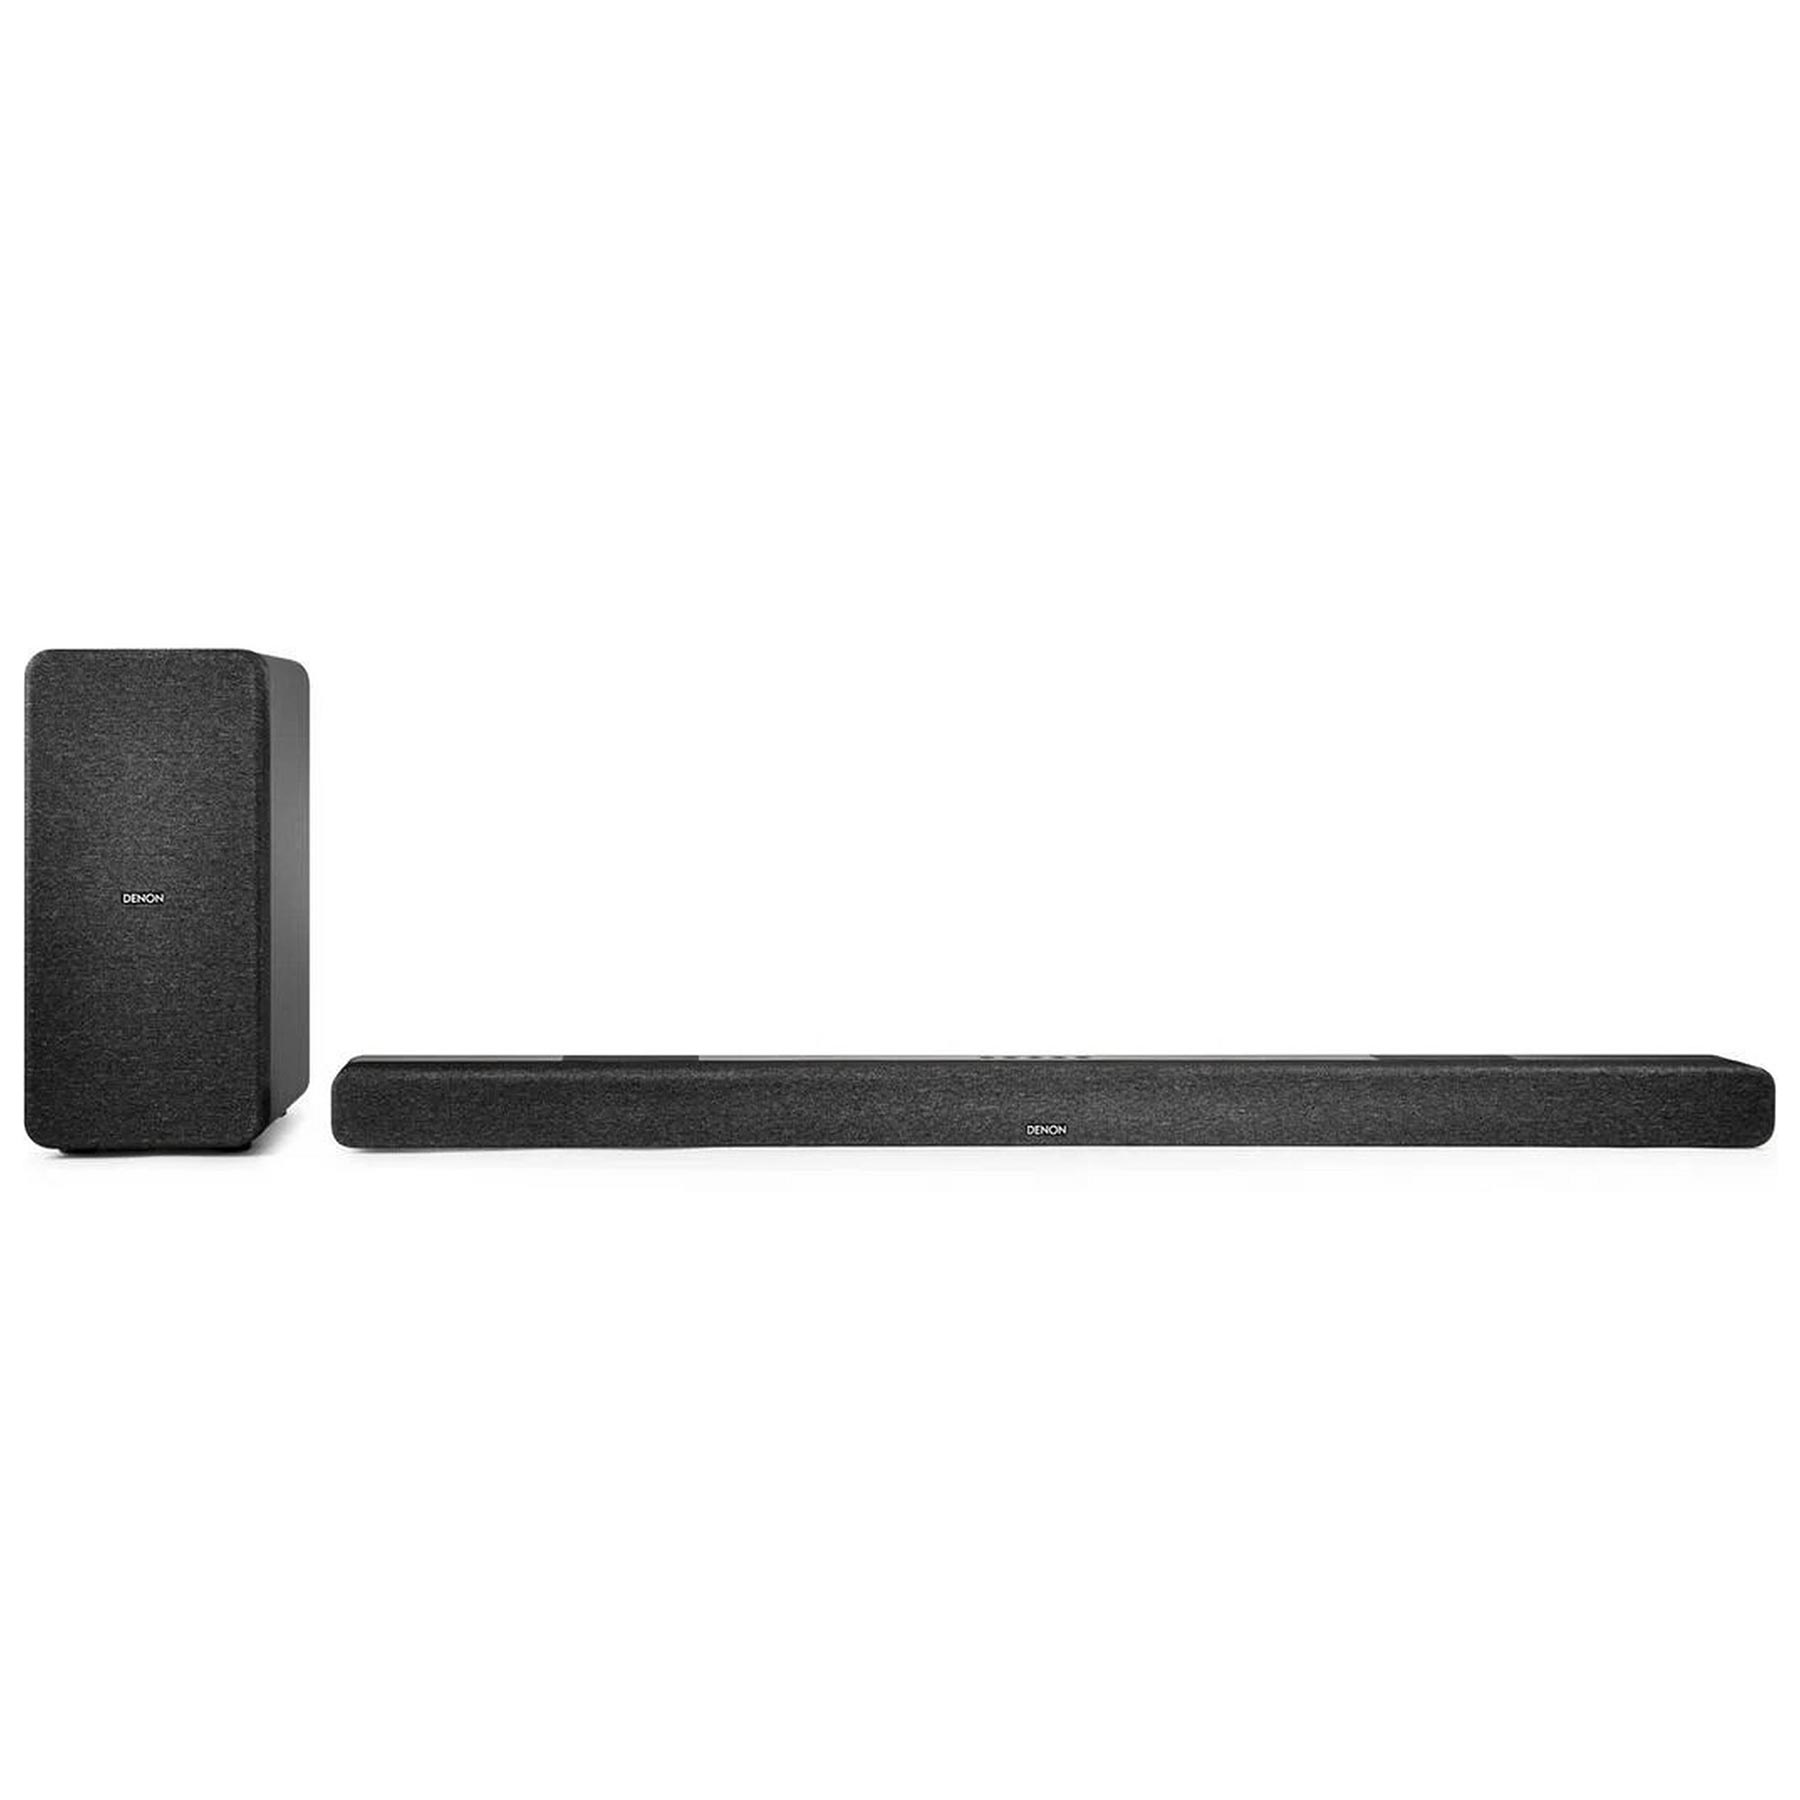 Image of Denon DHTS517 3 1 2Ch Dolby Atmos Soundbar Wireless Subwoofer